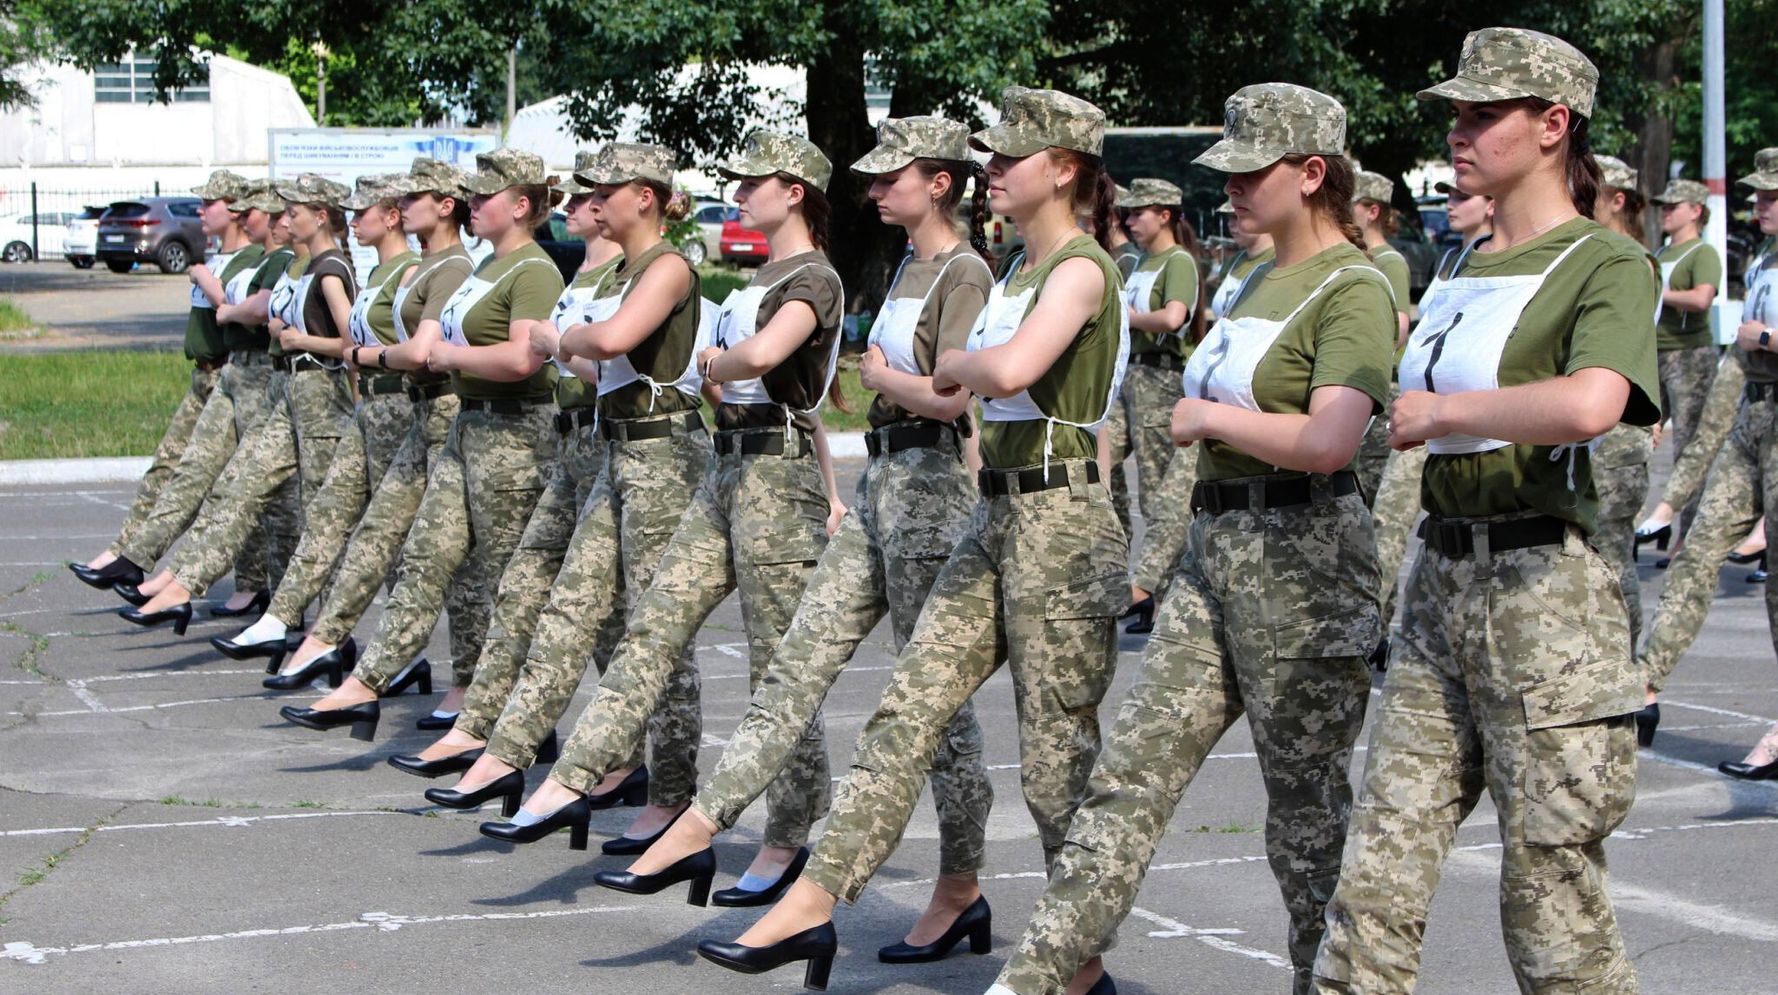 Ukraine Army Criticized For Making Female Cadets Parade In Heels